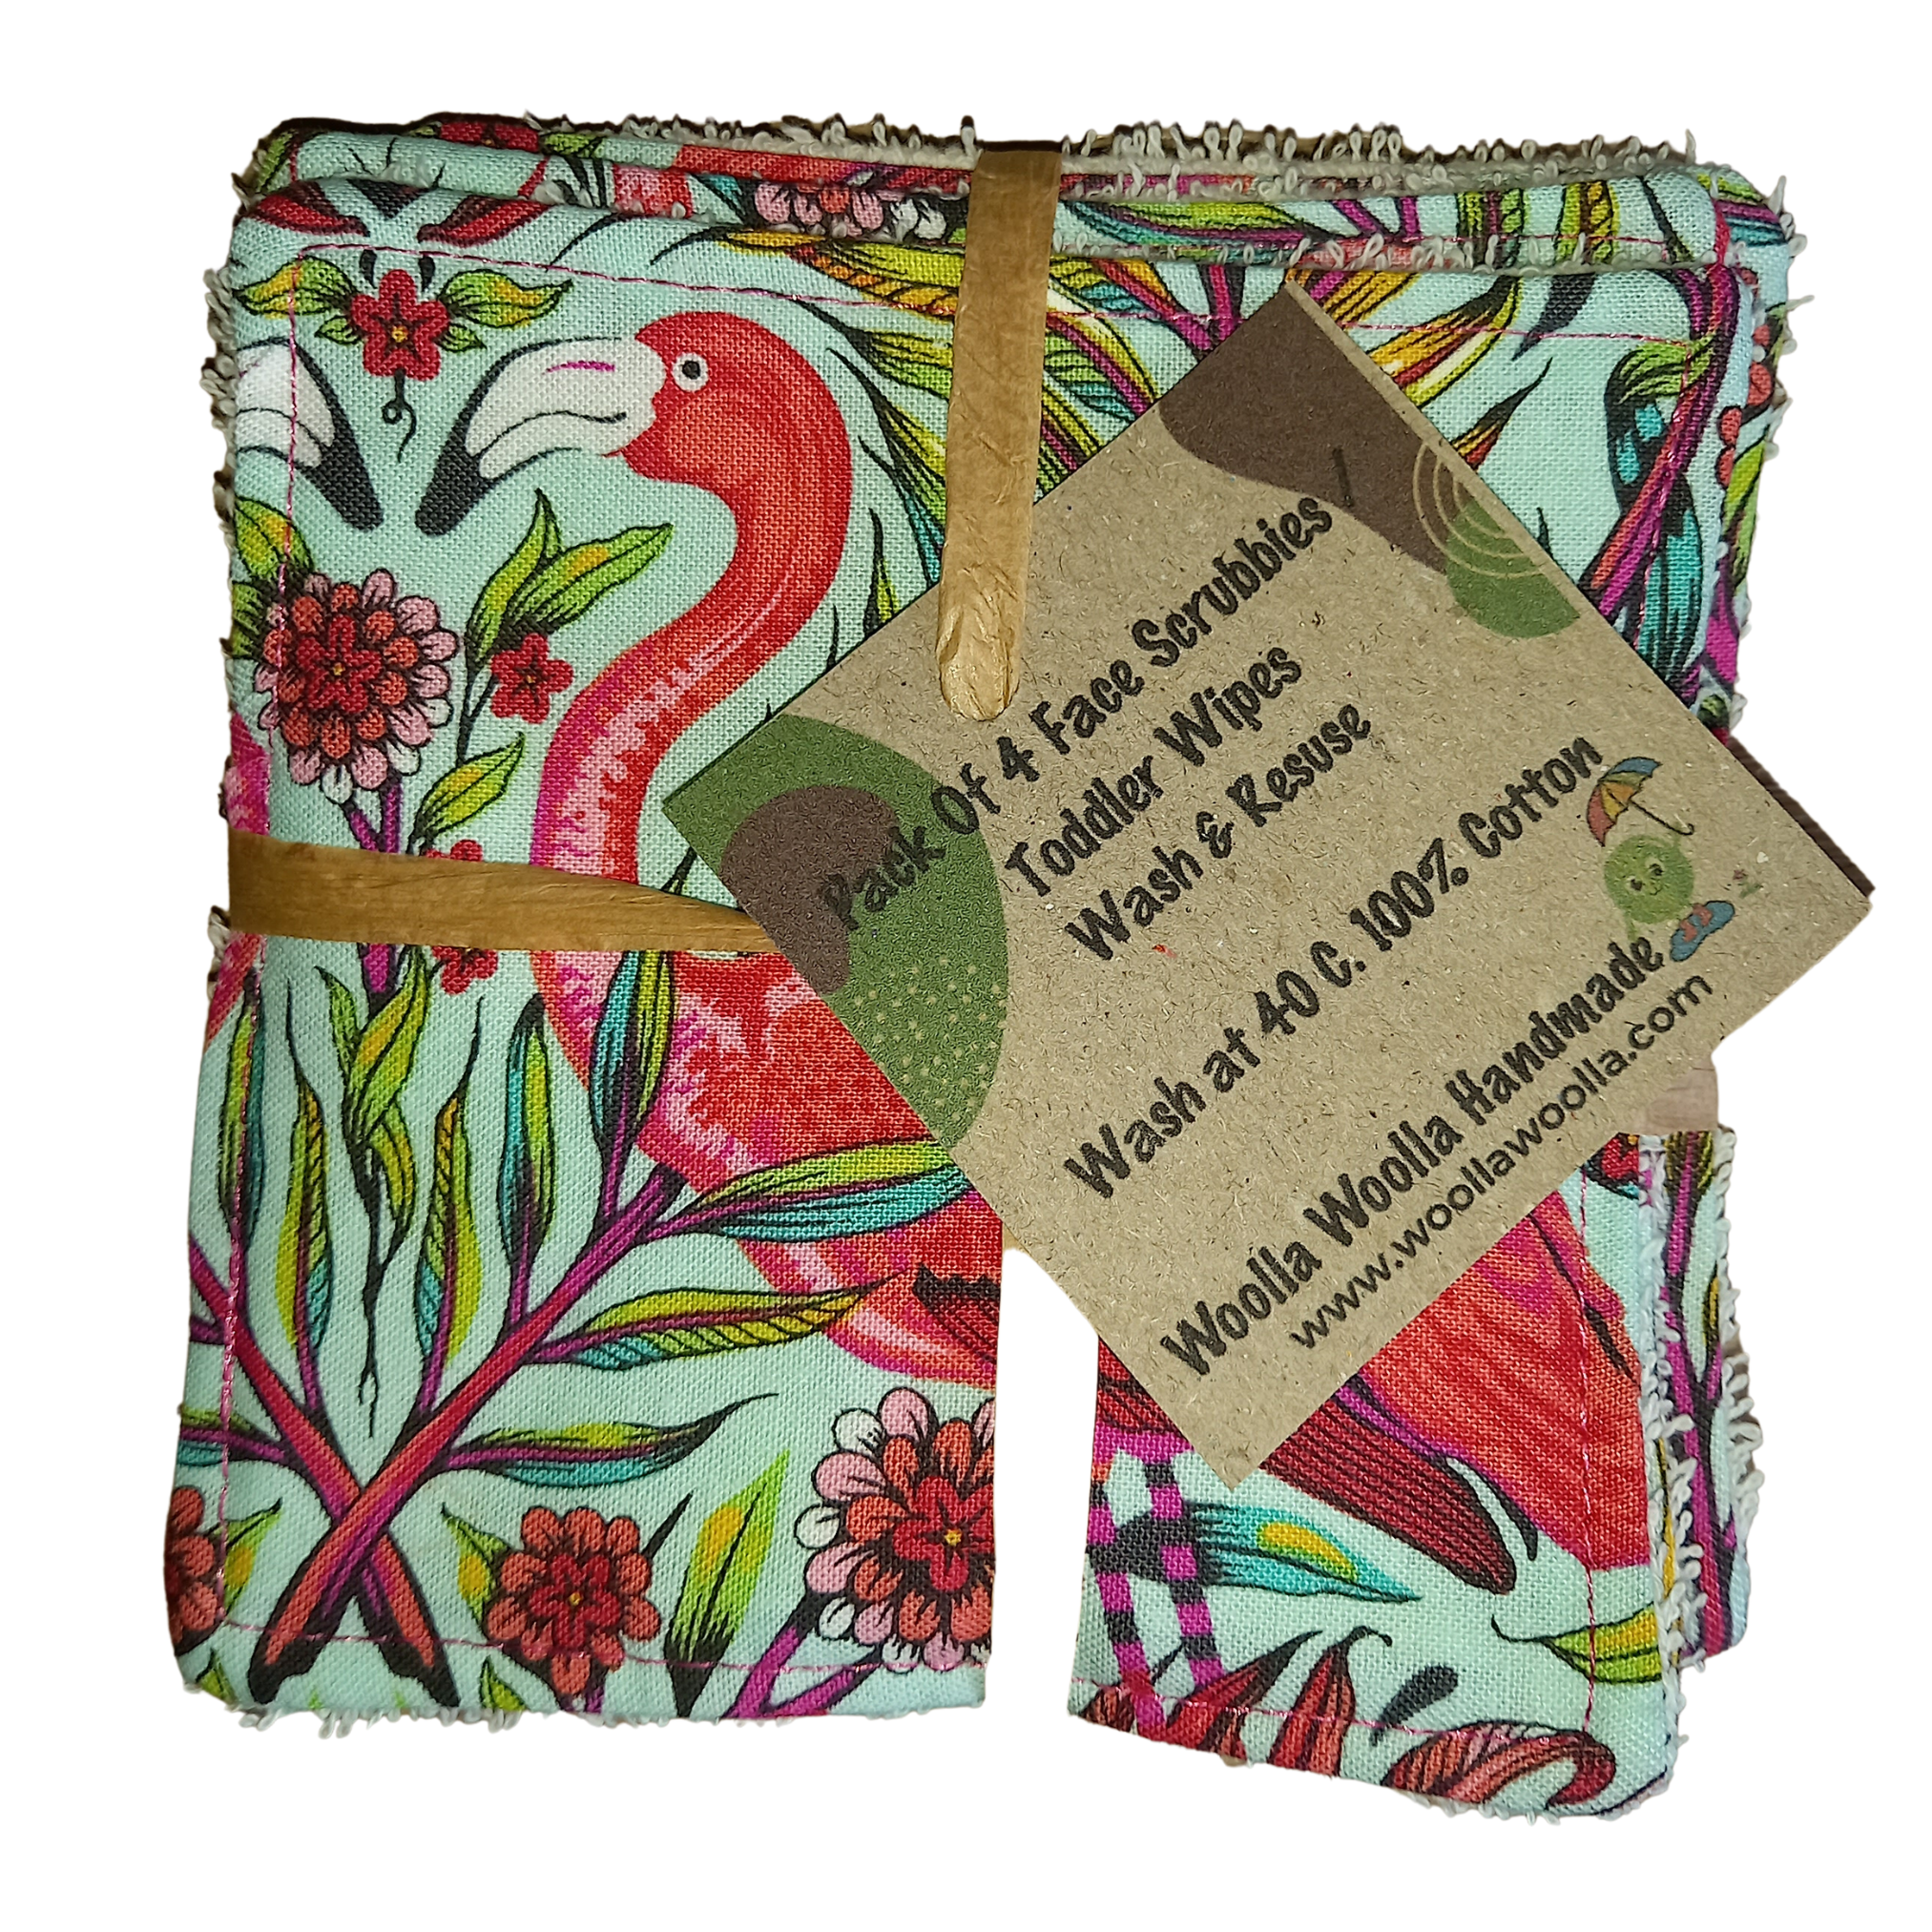 Reusable Cotton Wipes 4 Pack - Make Up - Toddler - Finger Wipes - T1 Mint Flamingo With Cream Towelling